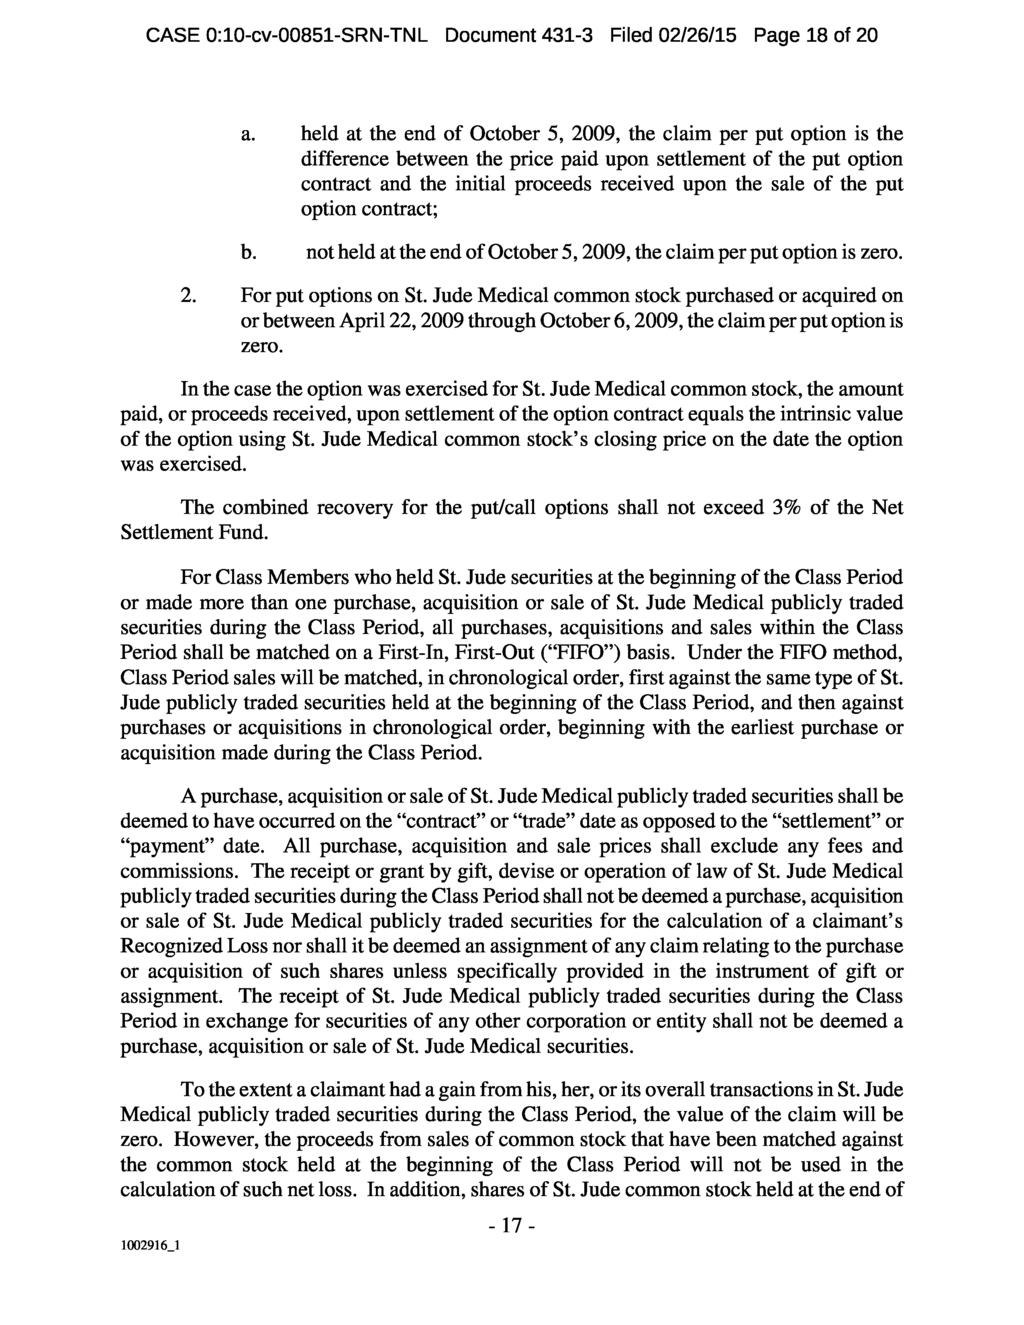 CASE 0:10-cv-00851-SRN-TNL Document 431-3 Filed 02/26/15 Page 18 of 20 a.